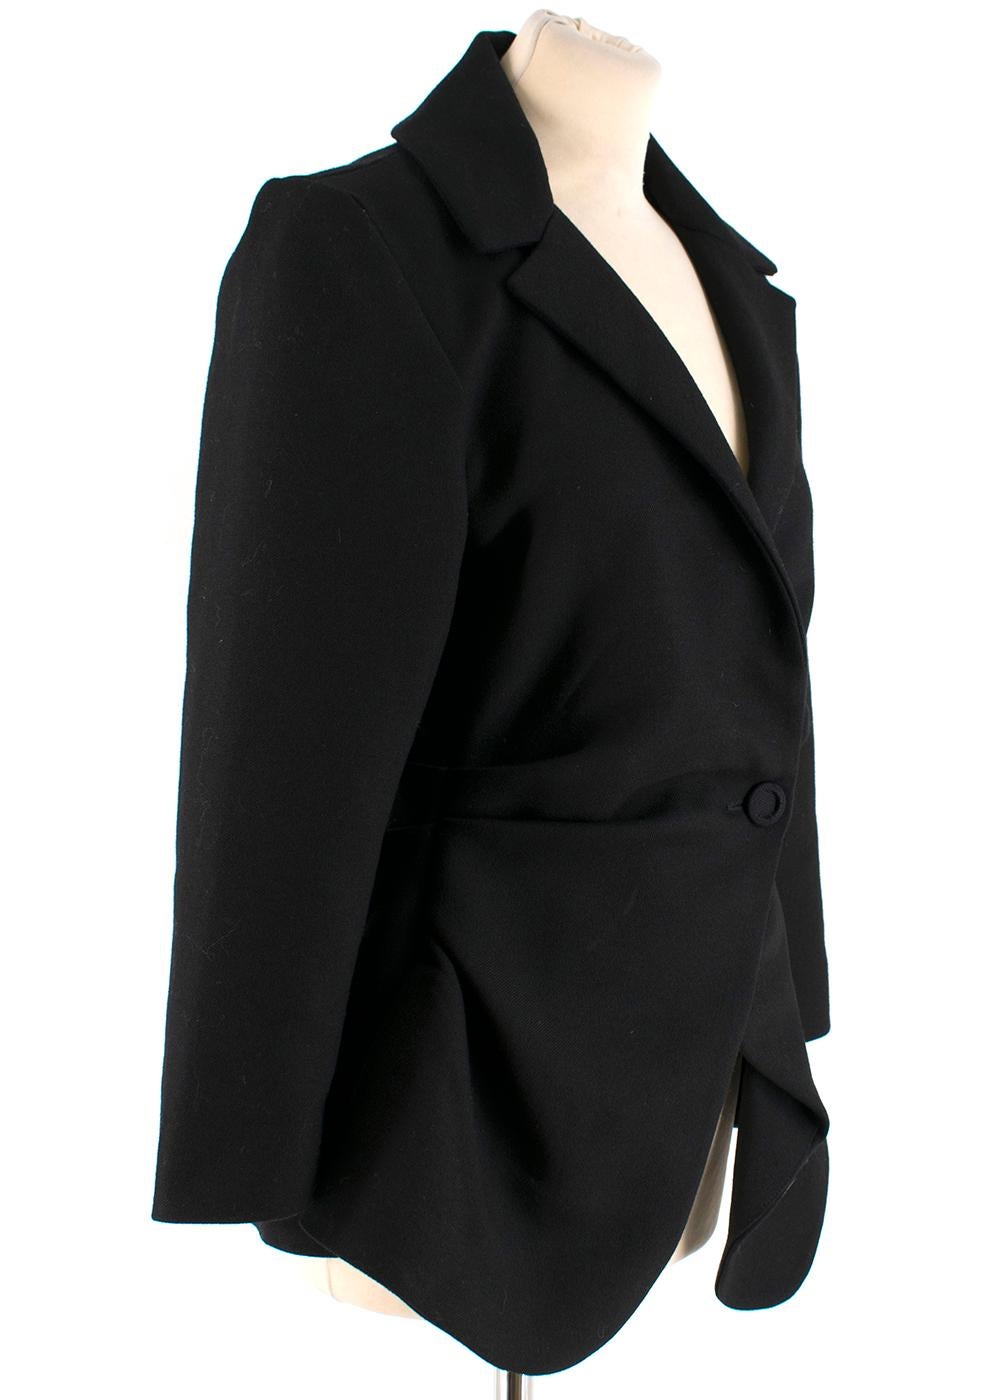 Jacquemus Black Saad Wool Blazer. RRP £1250


- Black wool-blend blazer
- Mid-weight
- Padded shoulders
- Notch lapels
- Single-breasted single button fastening
- Asymmetric fit
- 40% virgin wool, 38% viscose, 24% polyamide.

Please note, these